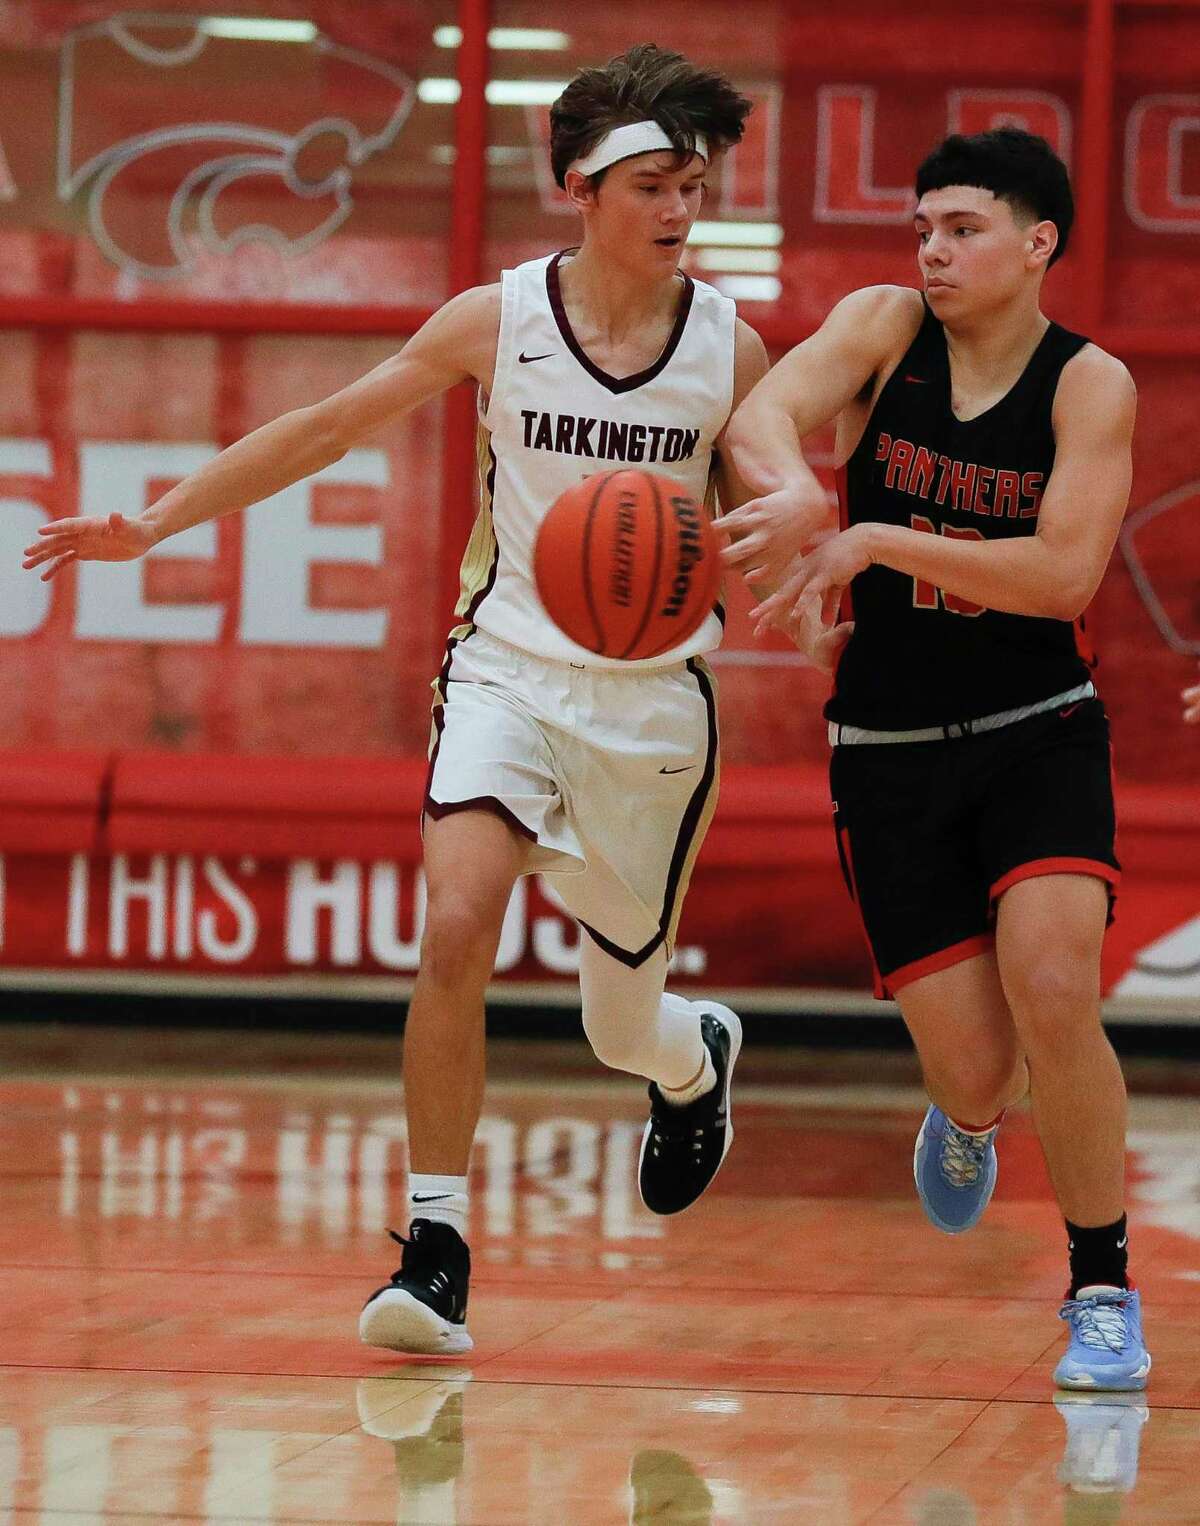 Caney Creek guard Tony Gonzales (13) makes a pass during a high school basketball game at Splendora High School, Thursday, Dec. 9, 2021, in Splendora.